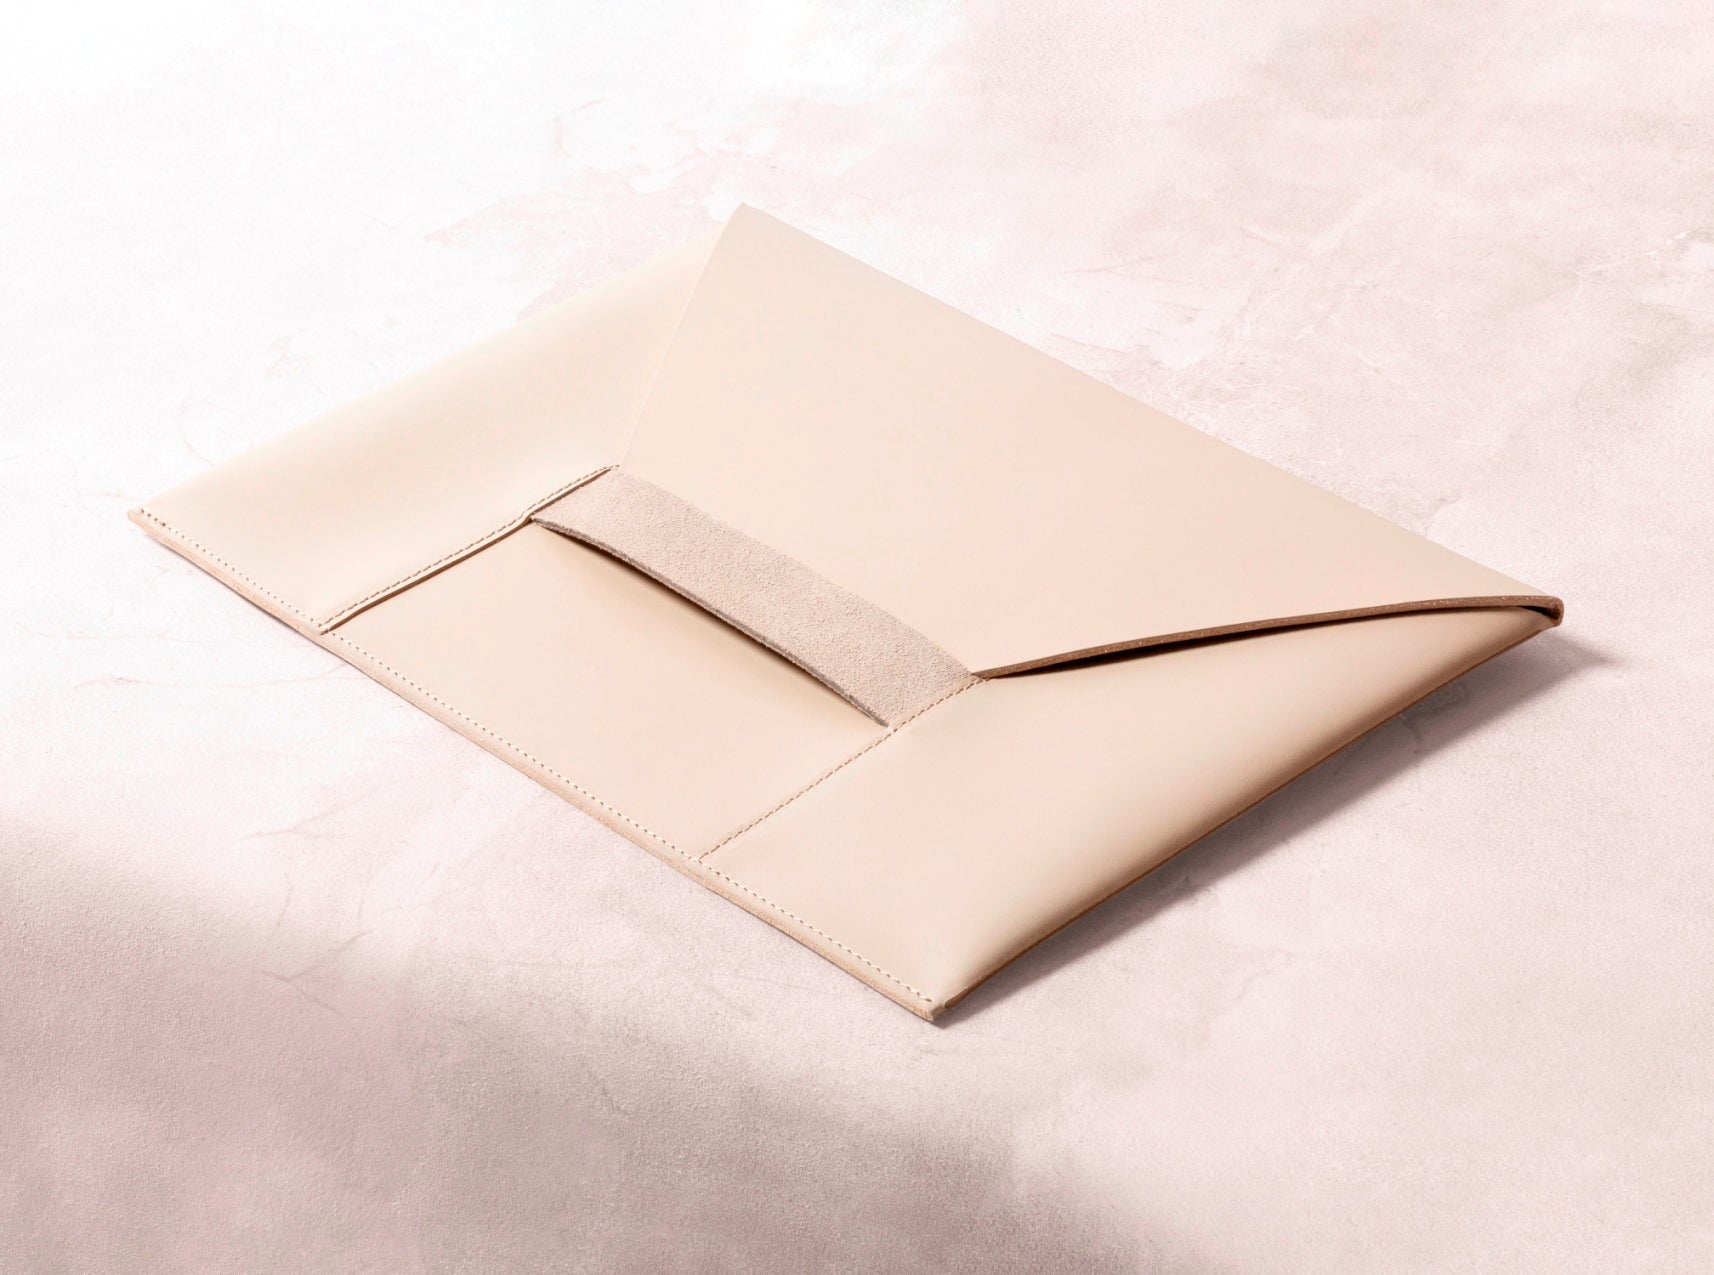 Rabitti 1969 Fold Saddle Leather Document Holder | Elegant and Functional Document Holder | Crafted with High-Quality Saddle Leather | Elevate Your Workspace with Luxury and Style | Explore a Range of Luxury Desk Accessories at 2Jour Concierge, #1 luxury high-end gift & lifestyle shop